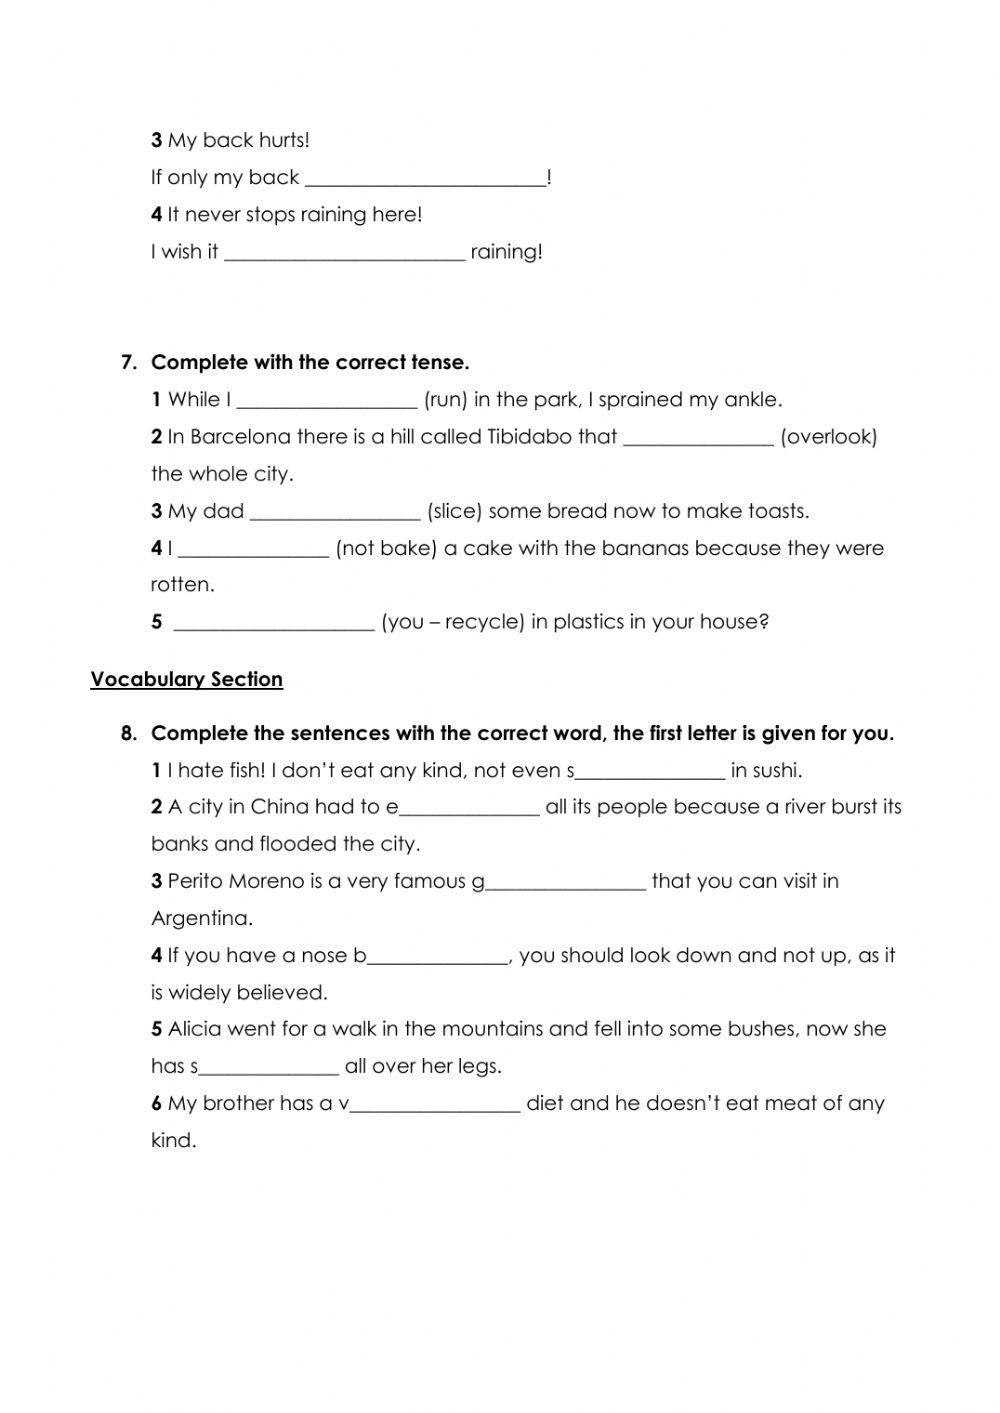 Use of English Section - End of Year Assessment